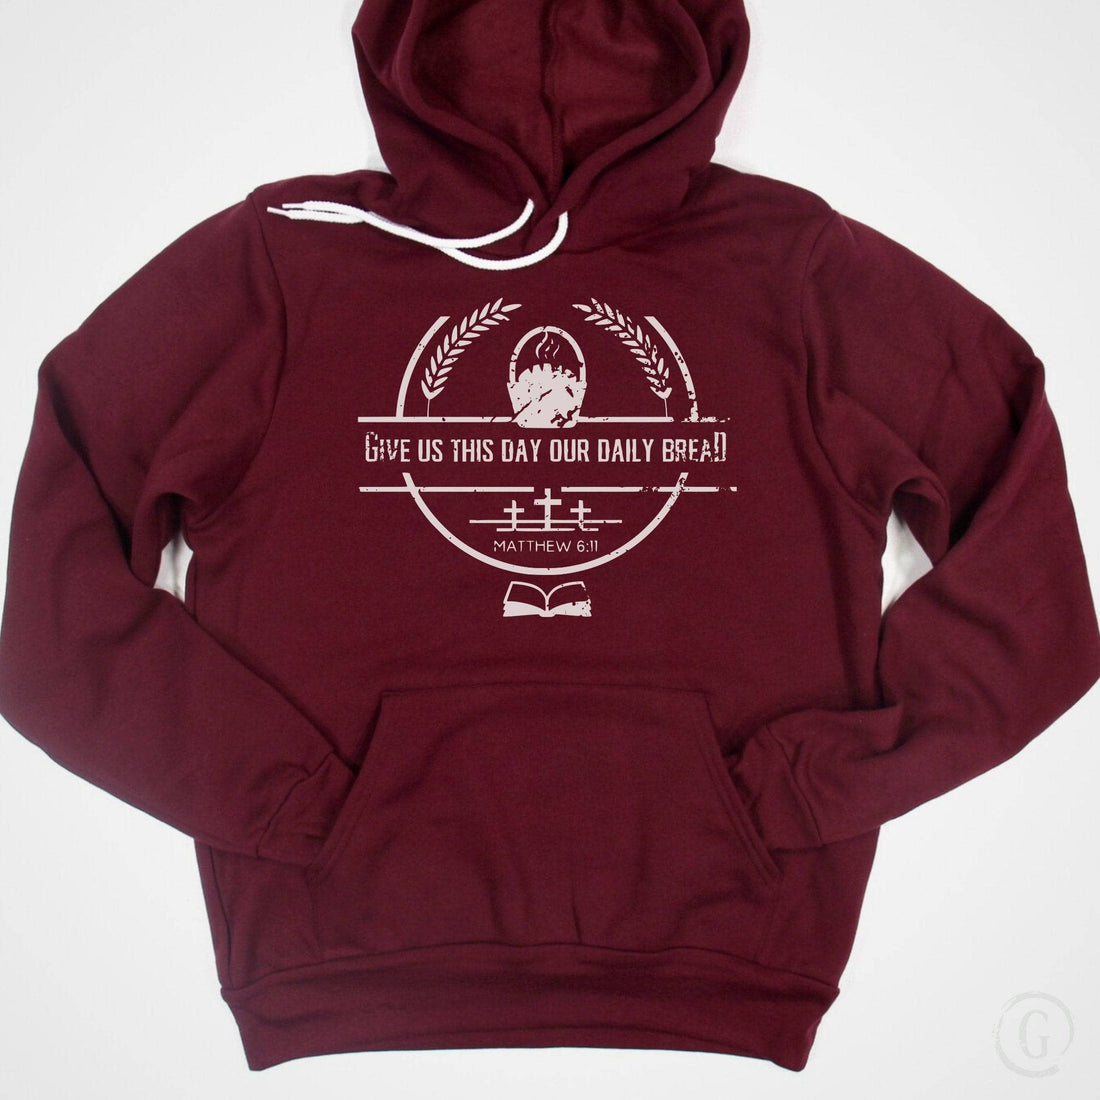 Give Us This Day Our Daily Bread Premium Unisex Pullover Hoodie Maroon